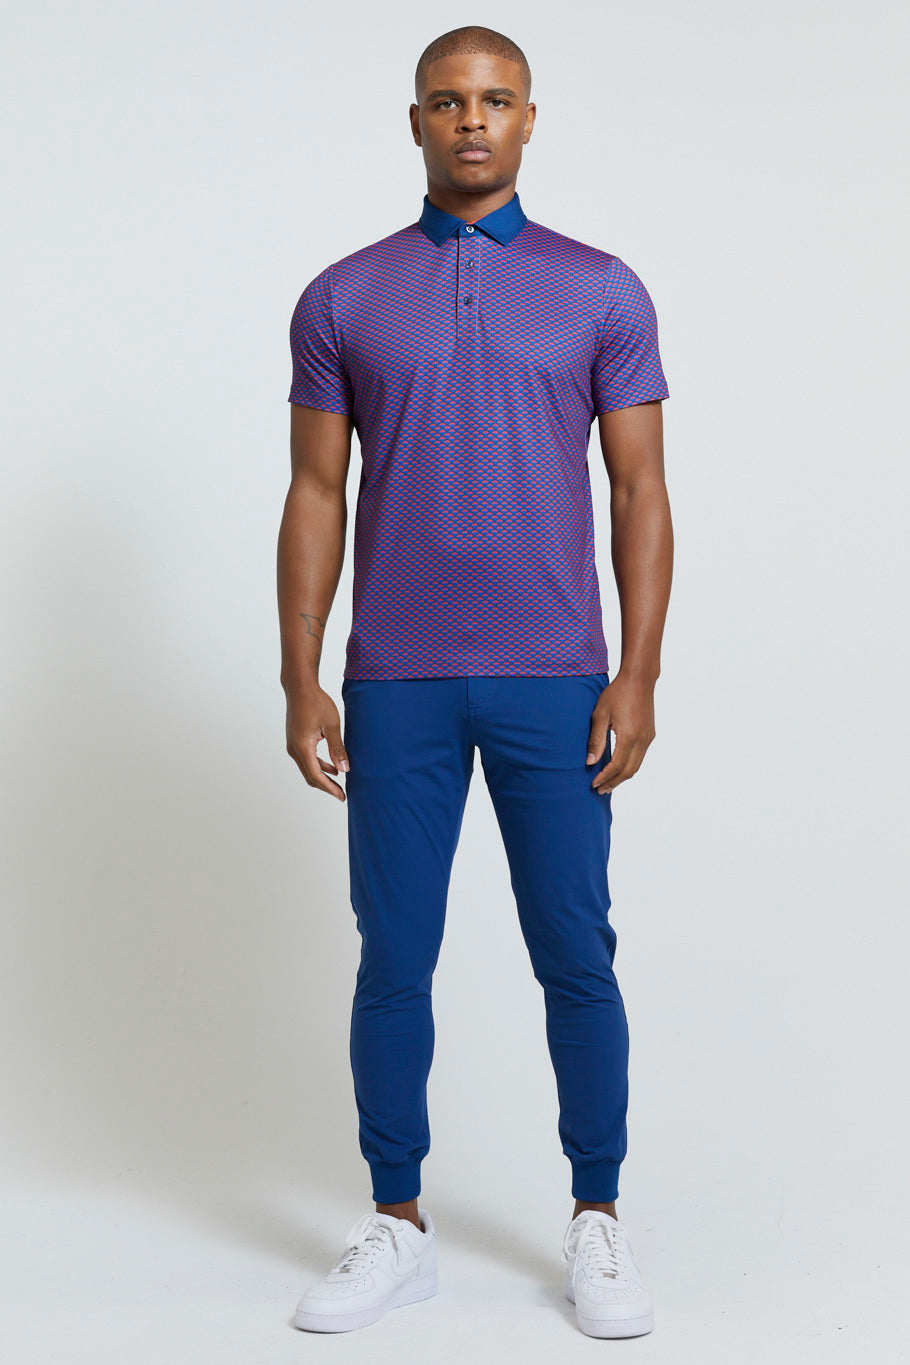 Image of the randolph polo in admiral